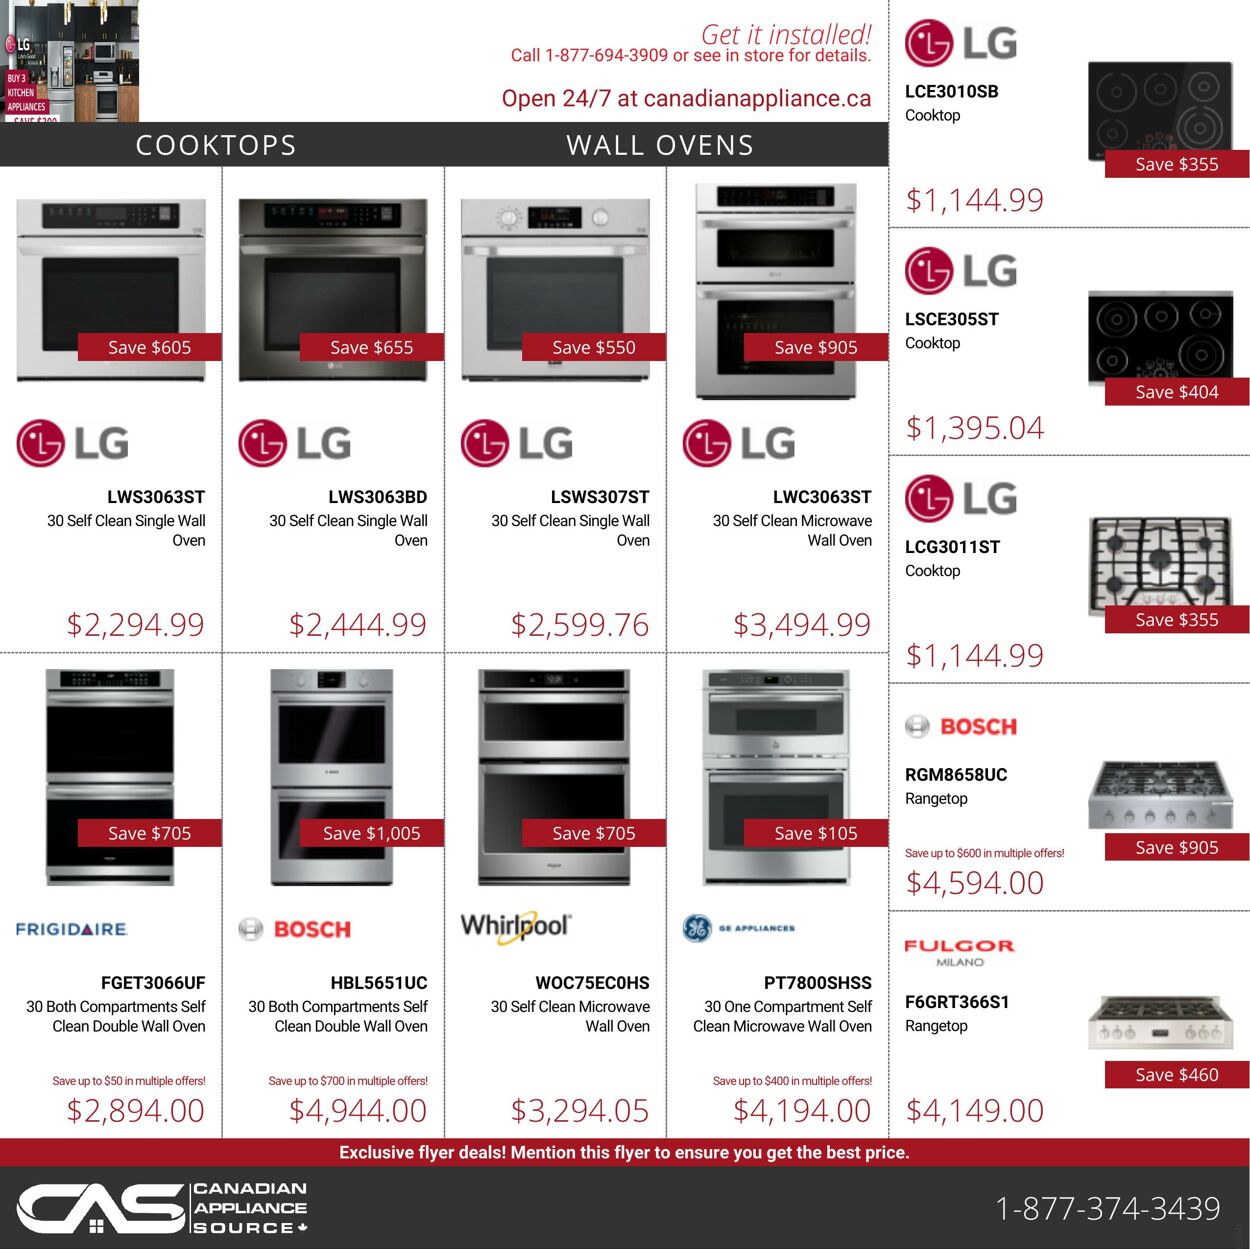 Flyer Canadian Appliance Source 27.01.2022 - 02.02.2022